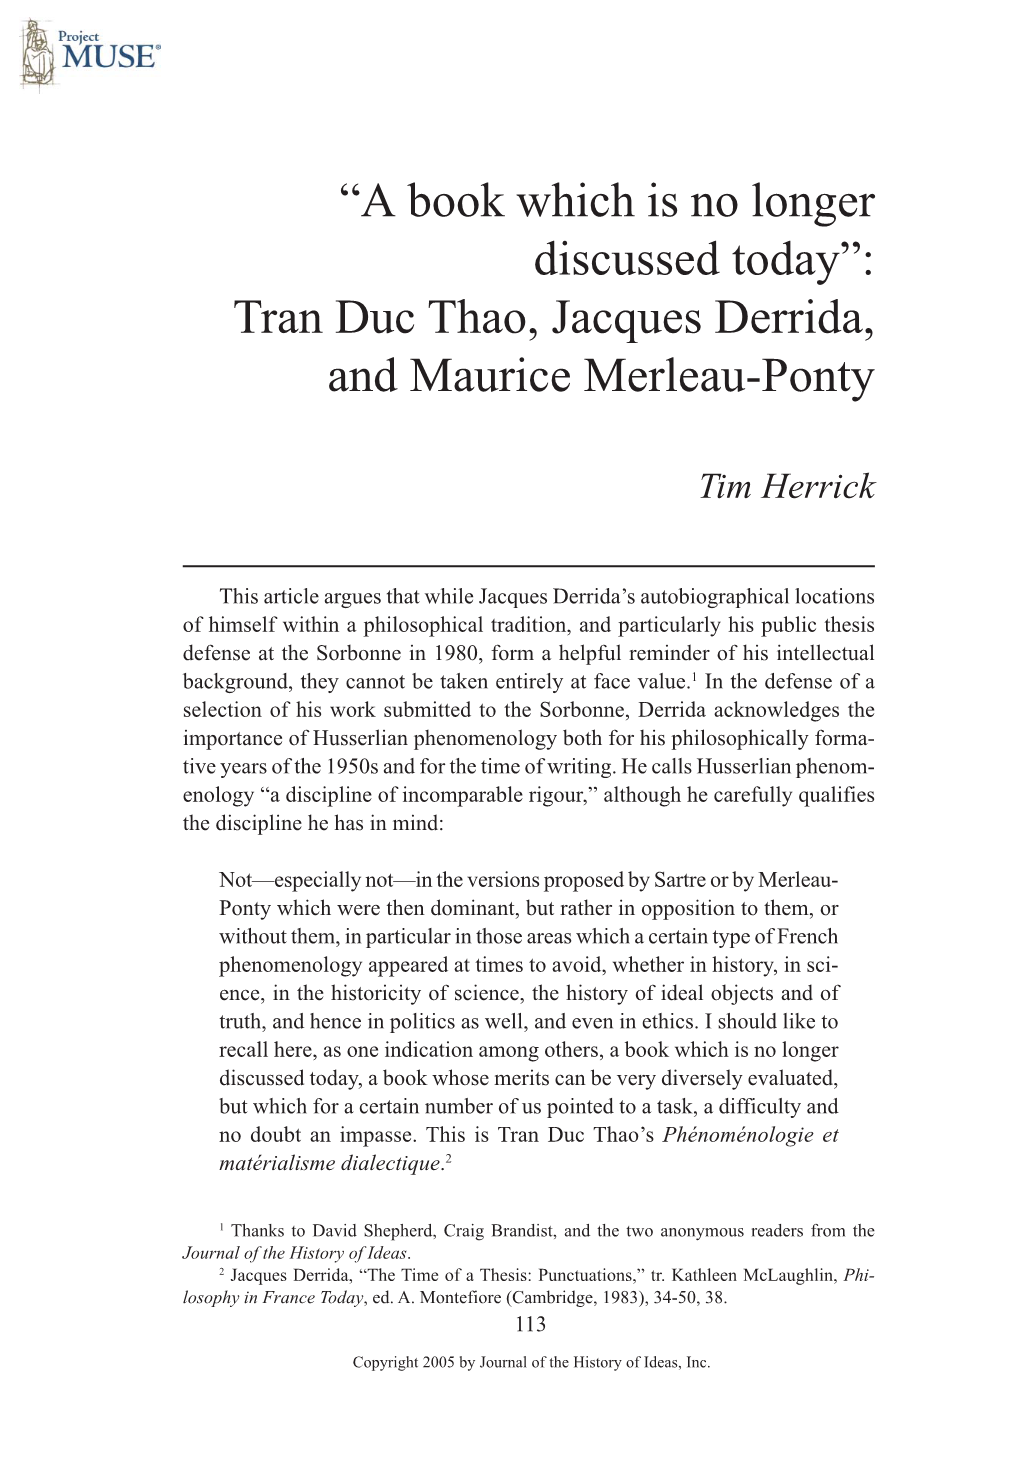 Tran Duc Thao, Jacques Derrida, and Maurice Merleau-Ponty